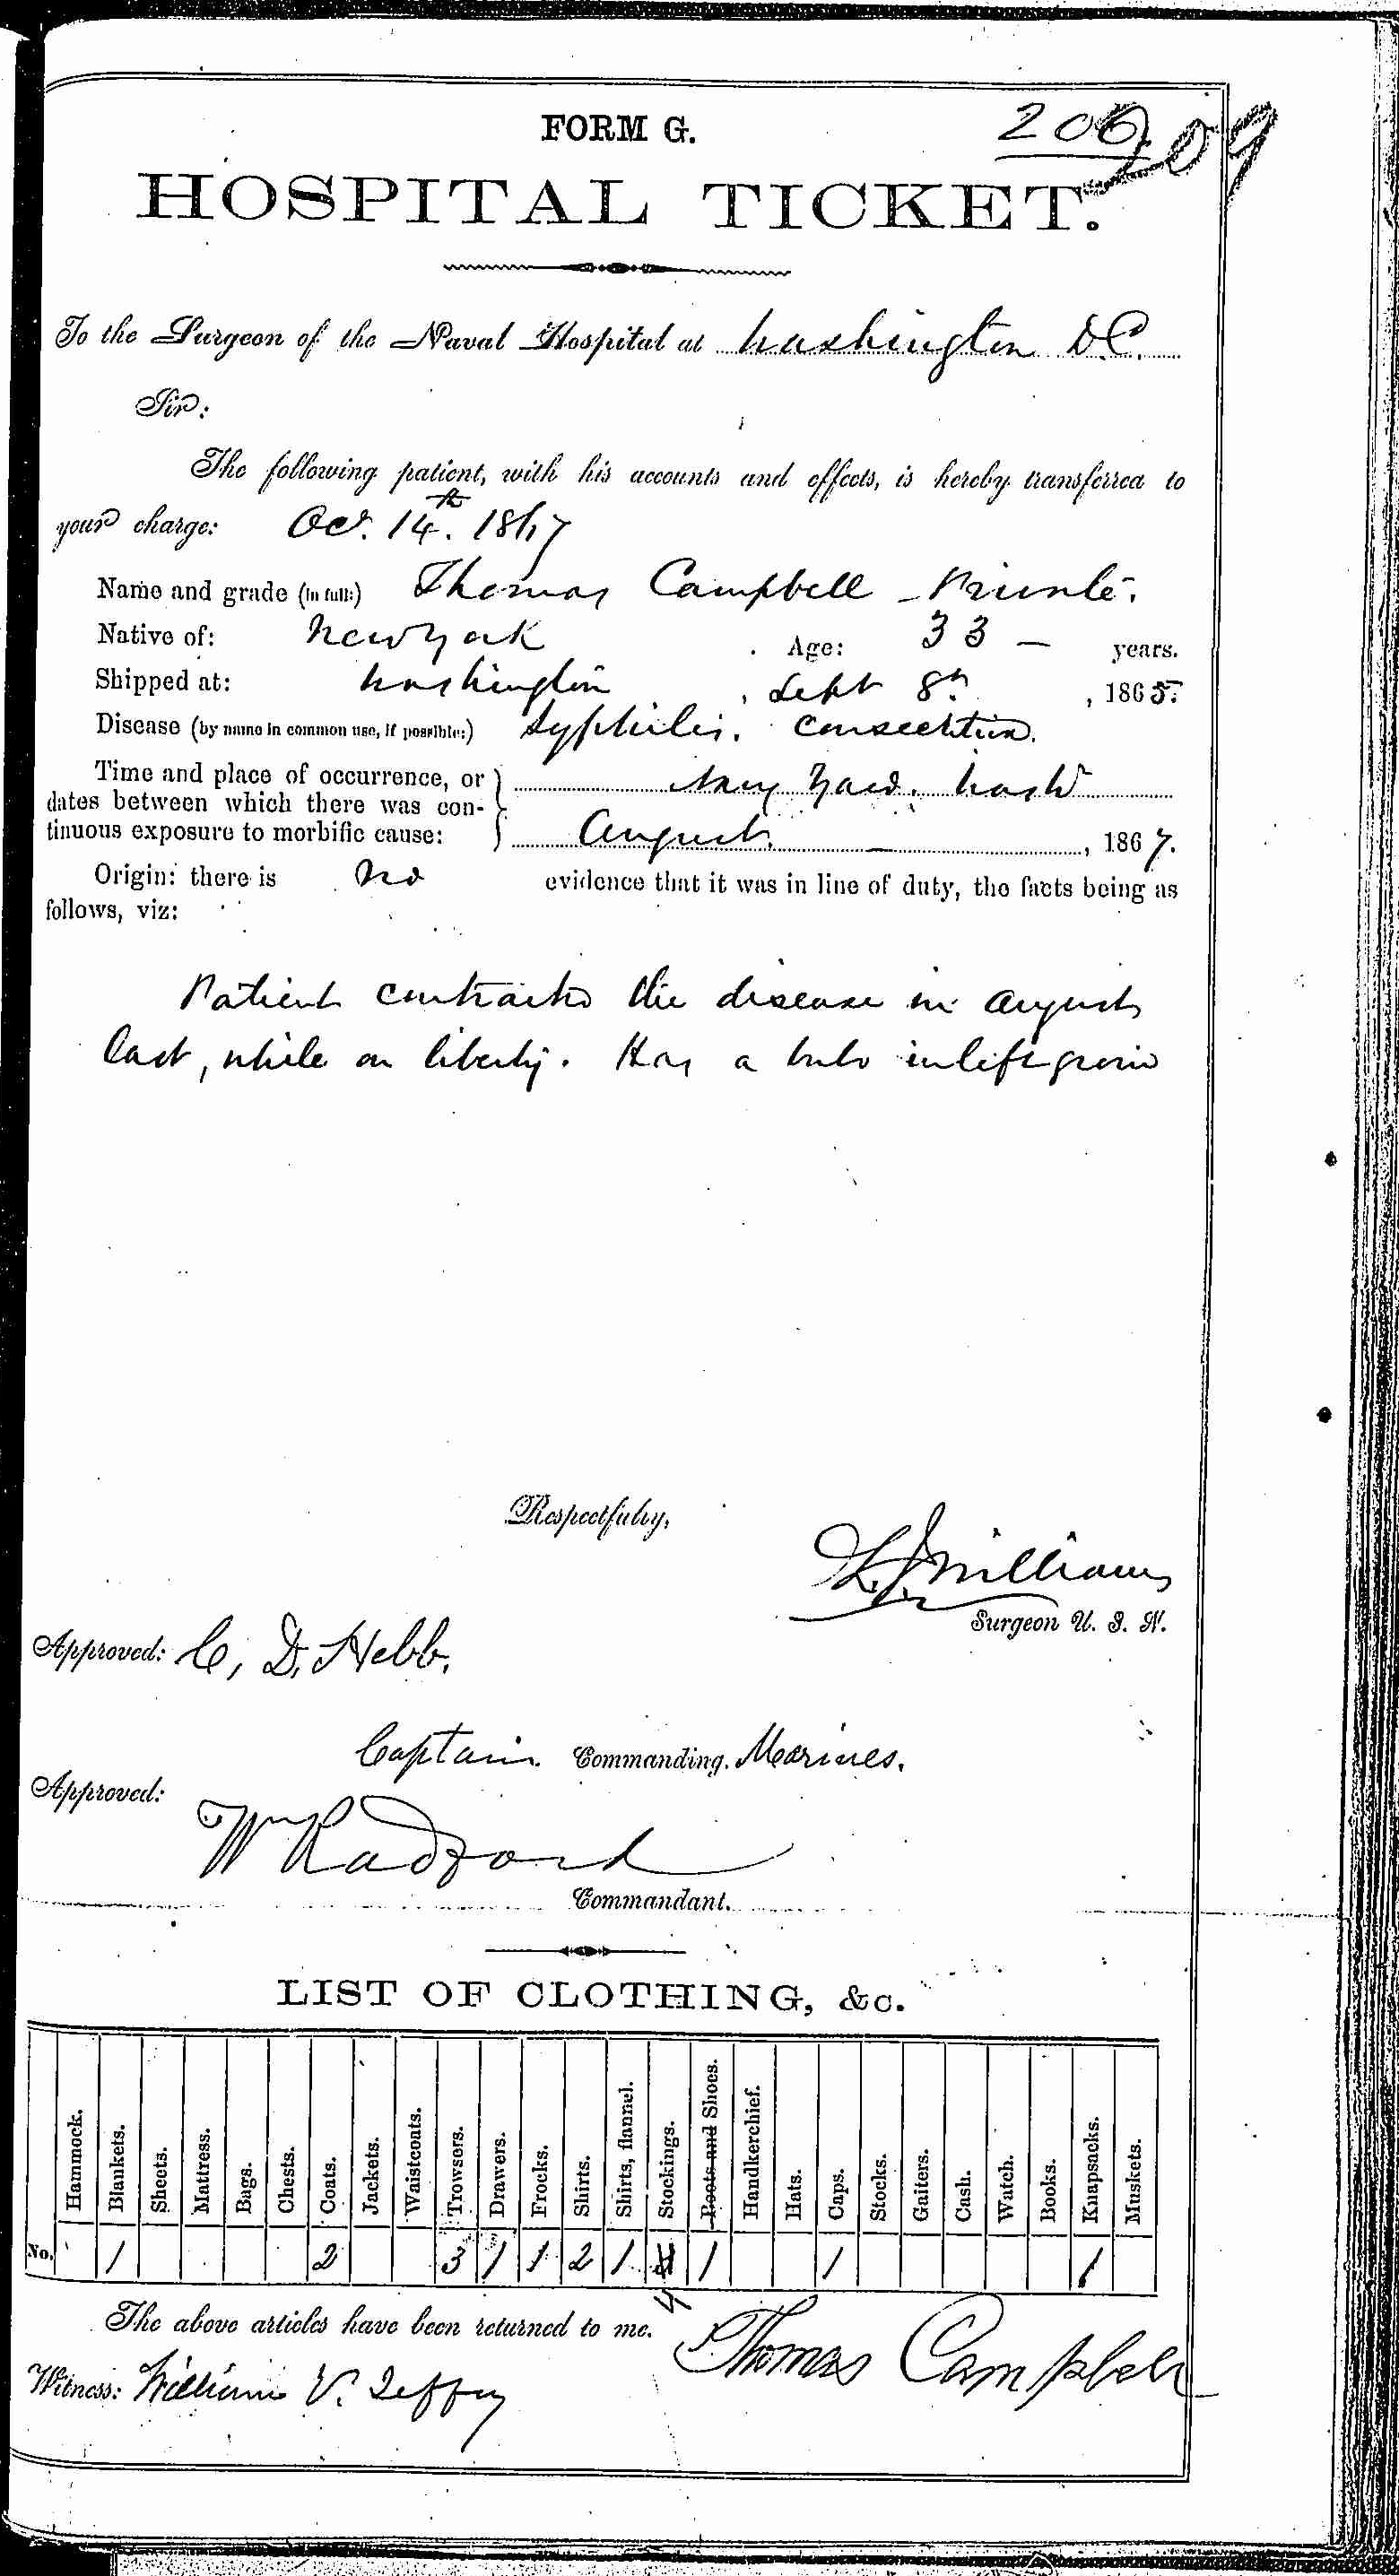 Entry for Thomas Campbell (third admission page 1 of 2) in the log Hospital Tickets and Case Papers - Naval Hospital - Washington, D.C. - 1866-68